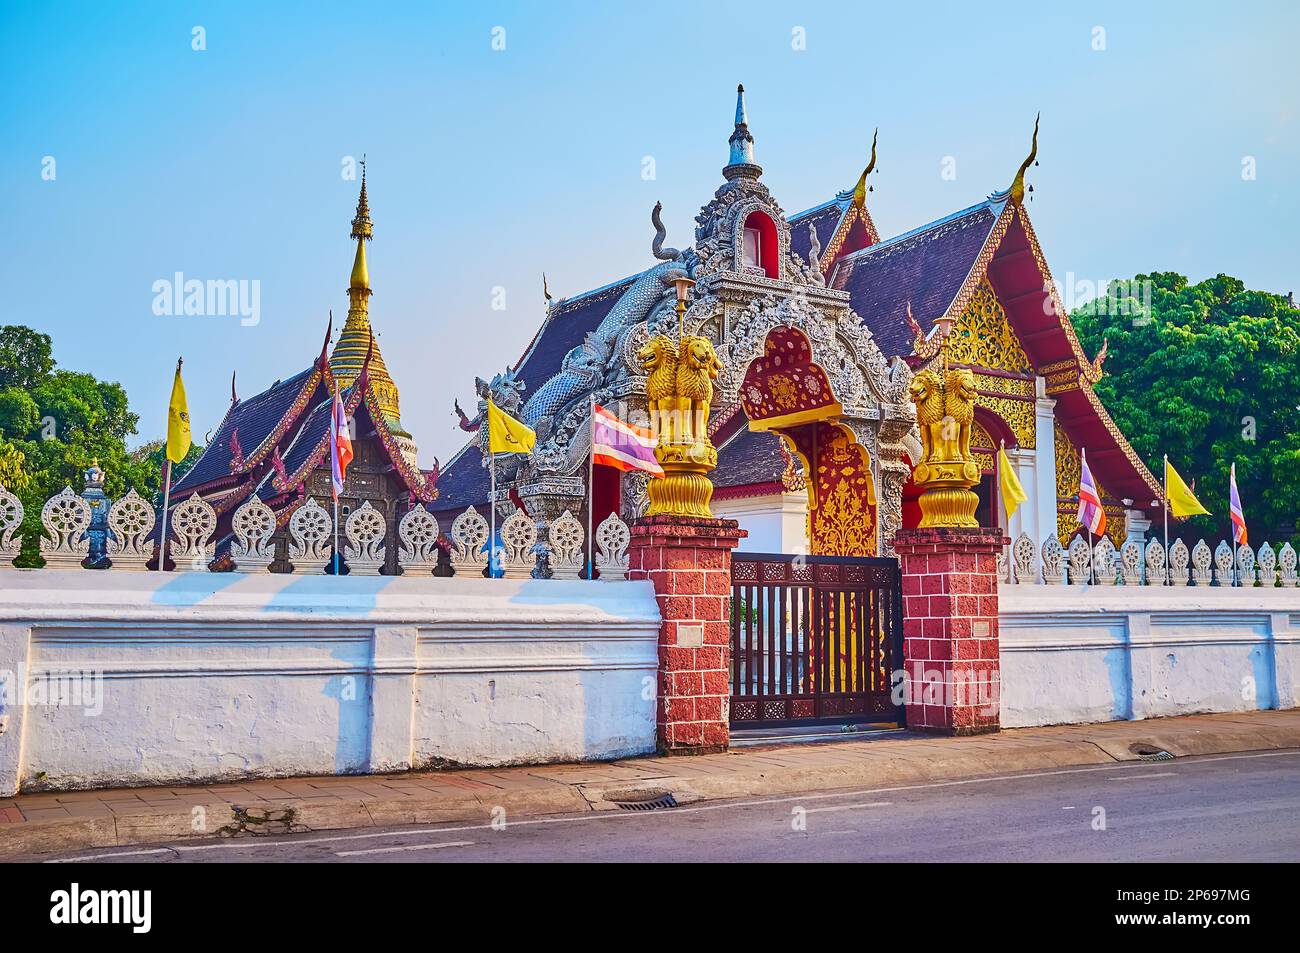 The gate of Wat Buppharam temple is decorated with gilt lion pillars, Chiang Mai, Thailand Stock Photo